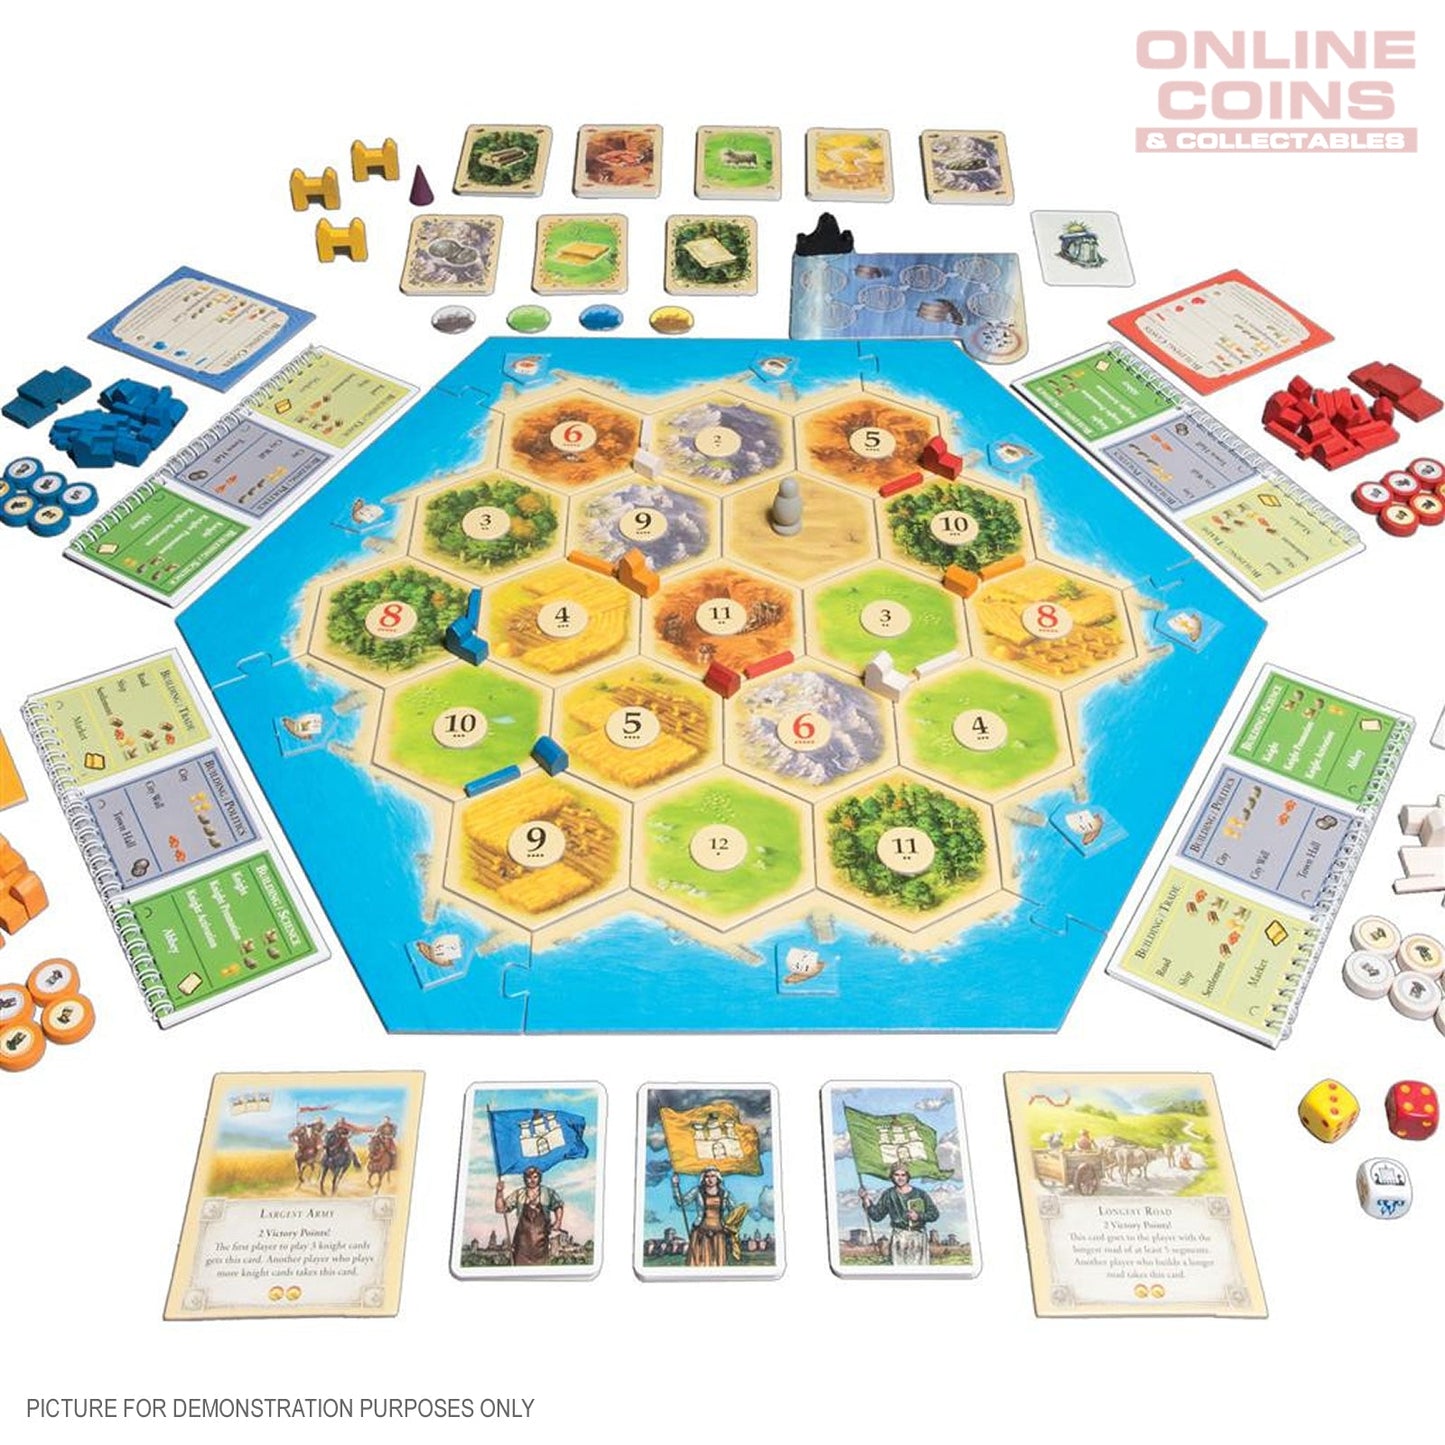 Catan - Cities & Knights Expansion